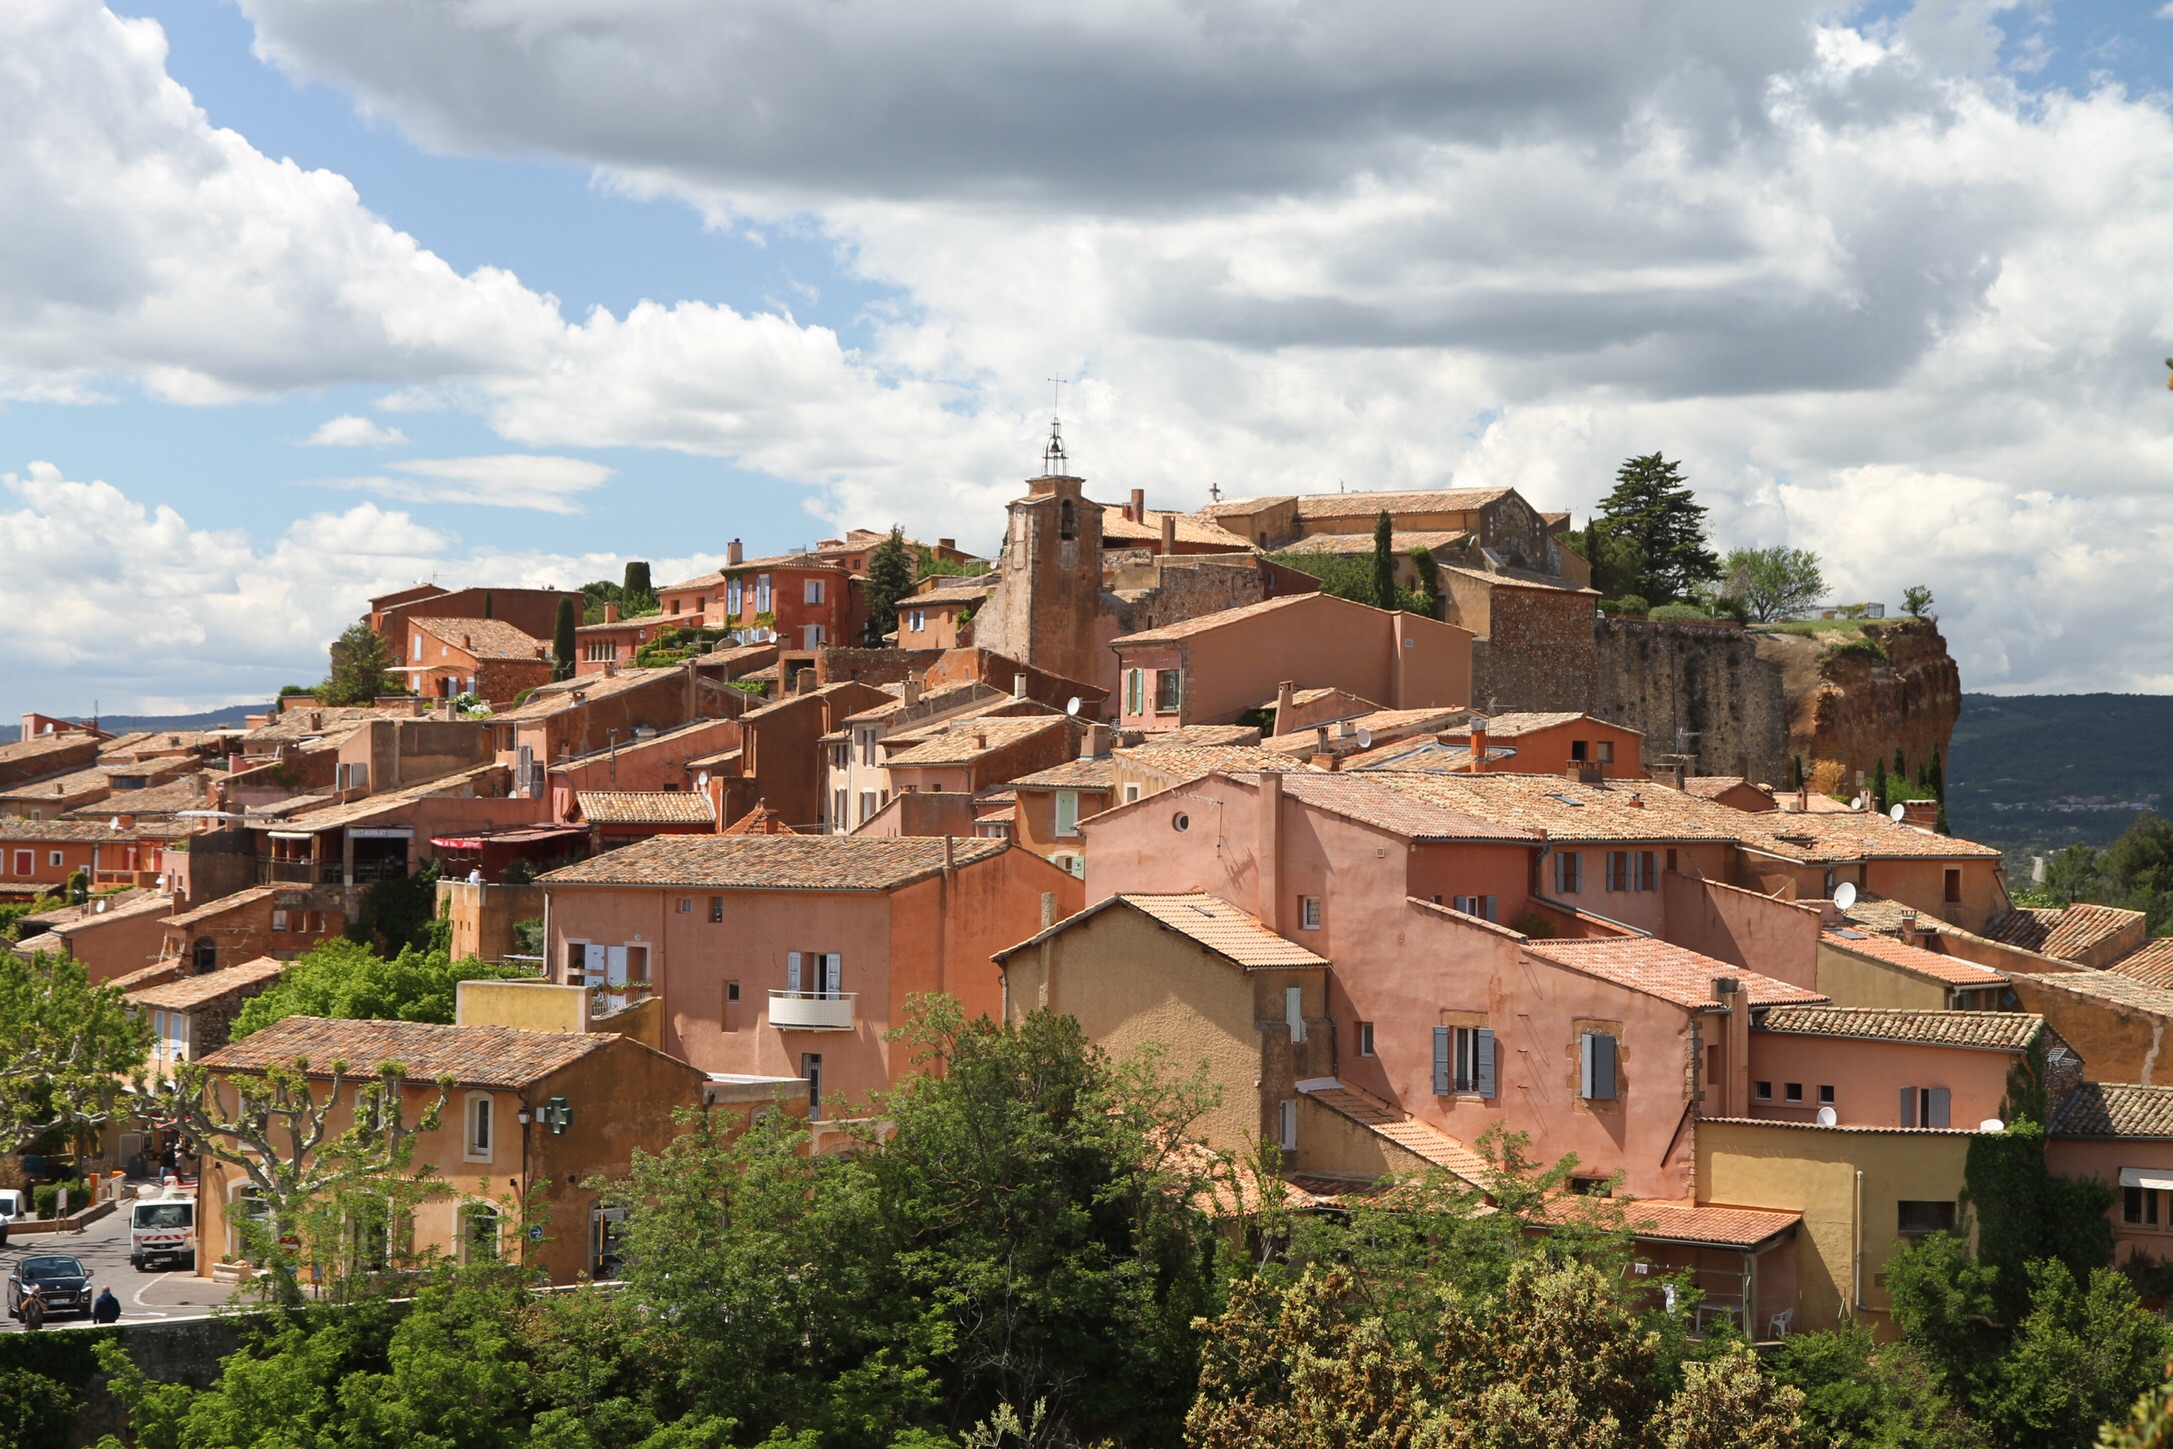 The ochre-colored buildings of Roussillon